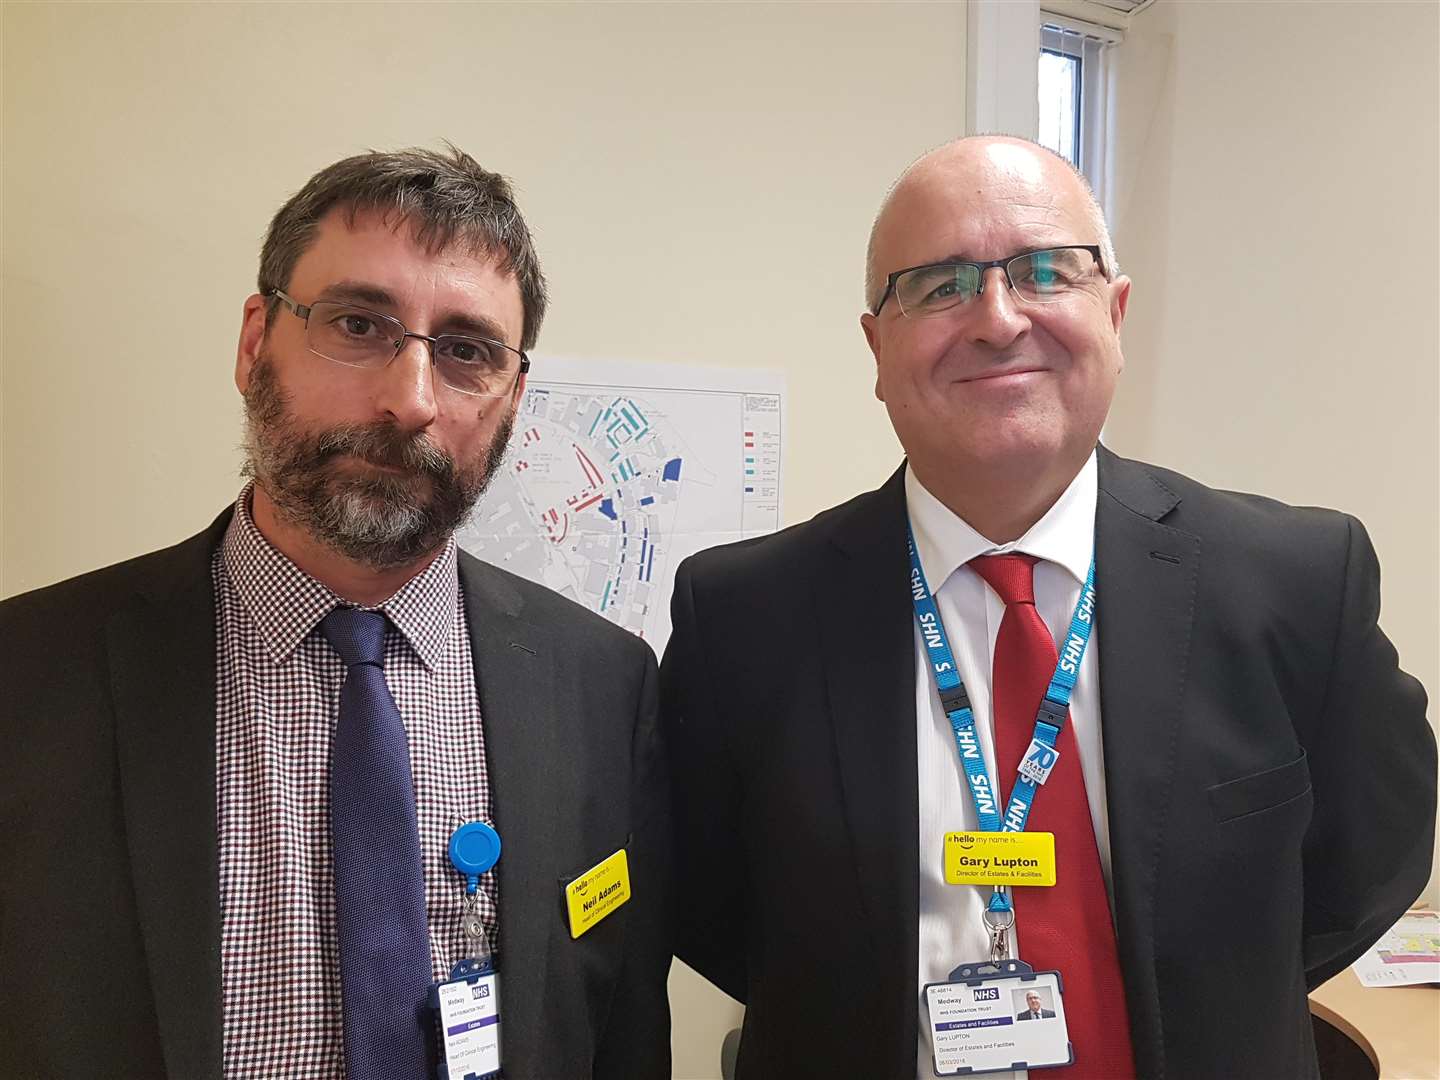 Neil Adams, head of clinical engineering,and Gary Lupton, director of estates and facilities, from Medway Hospital (4096830)